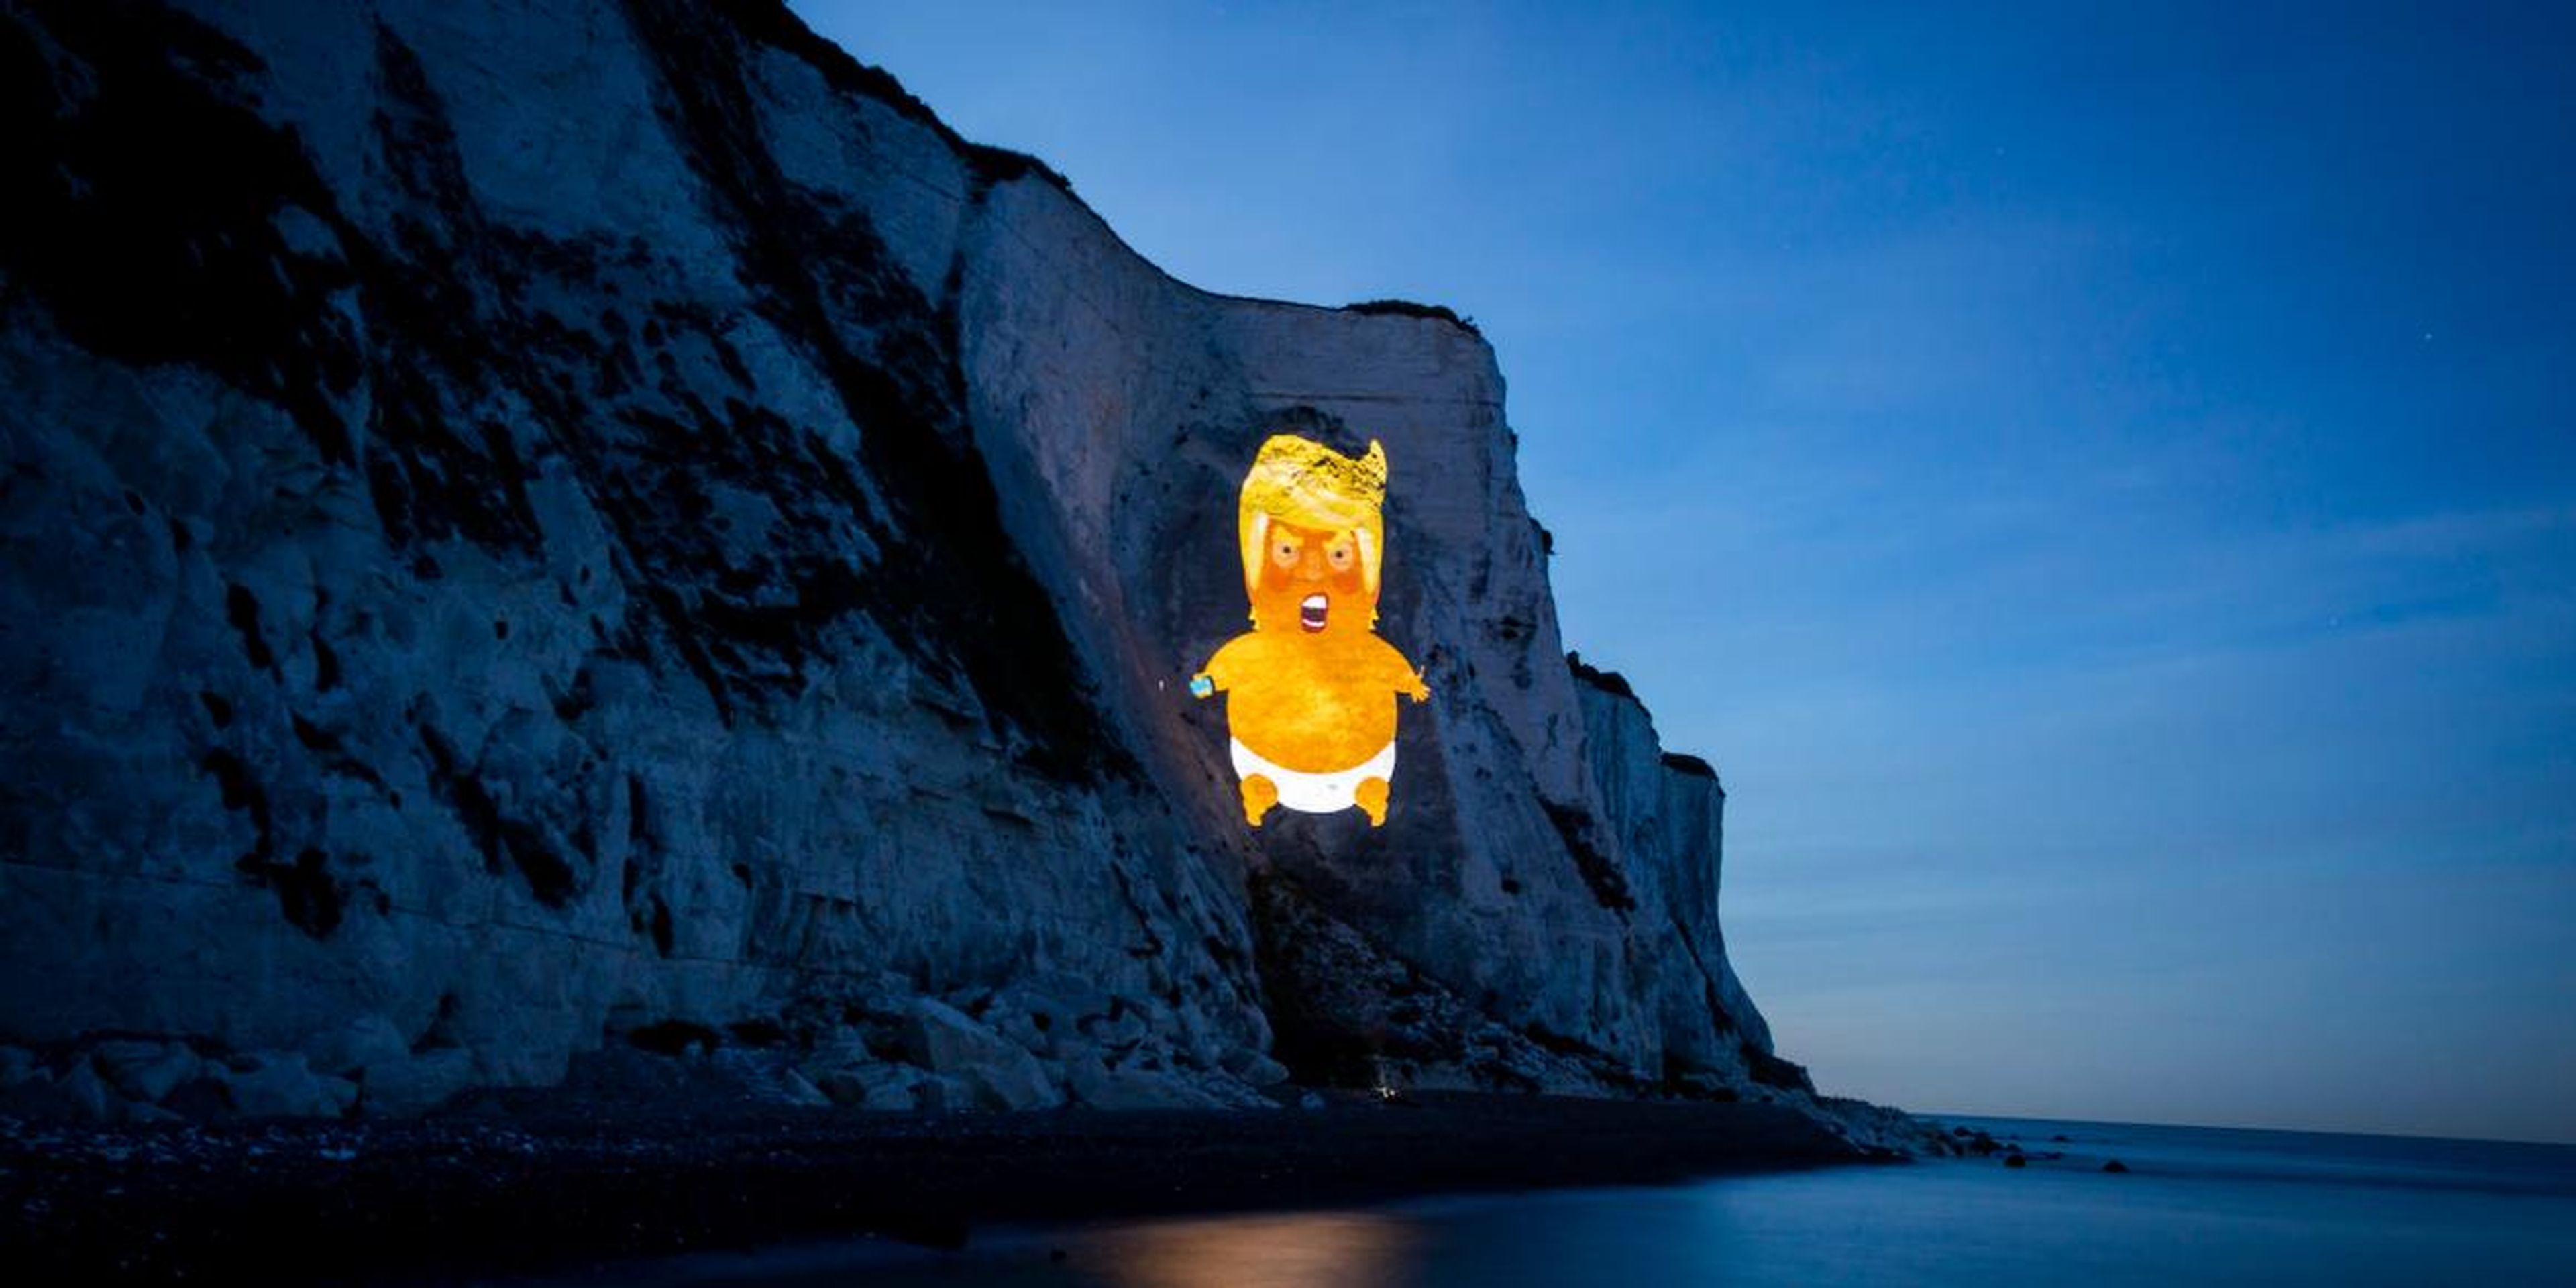 The Trump baby blimp symbol was projected onto the White Cliffs of Dover, on England's southern coast on Sunday.